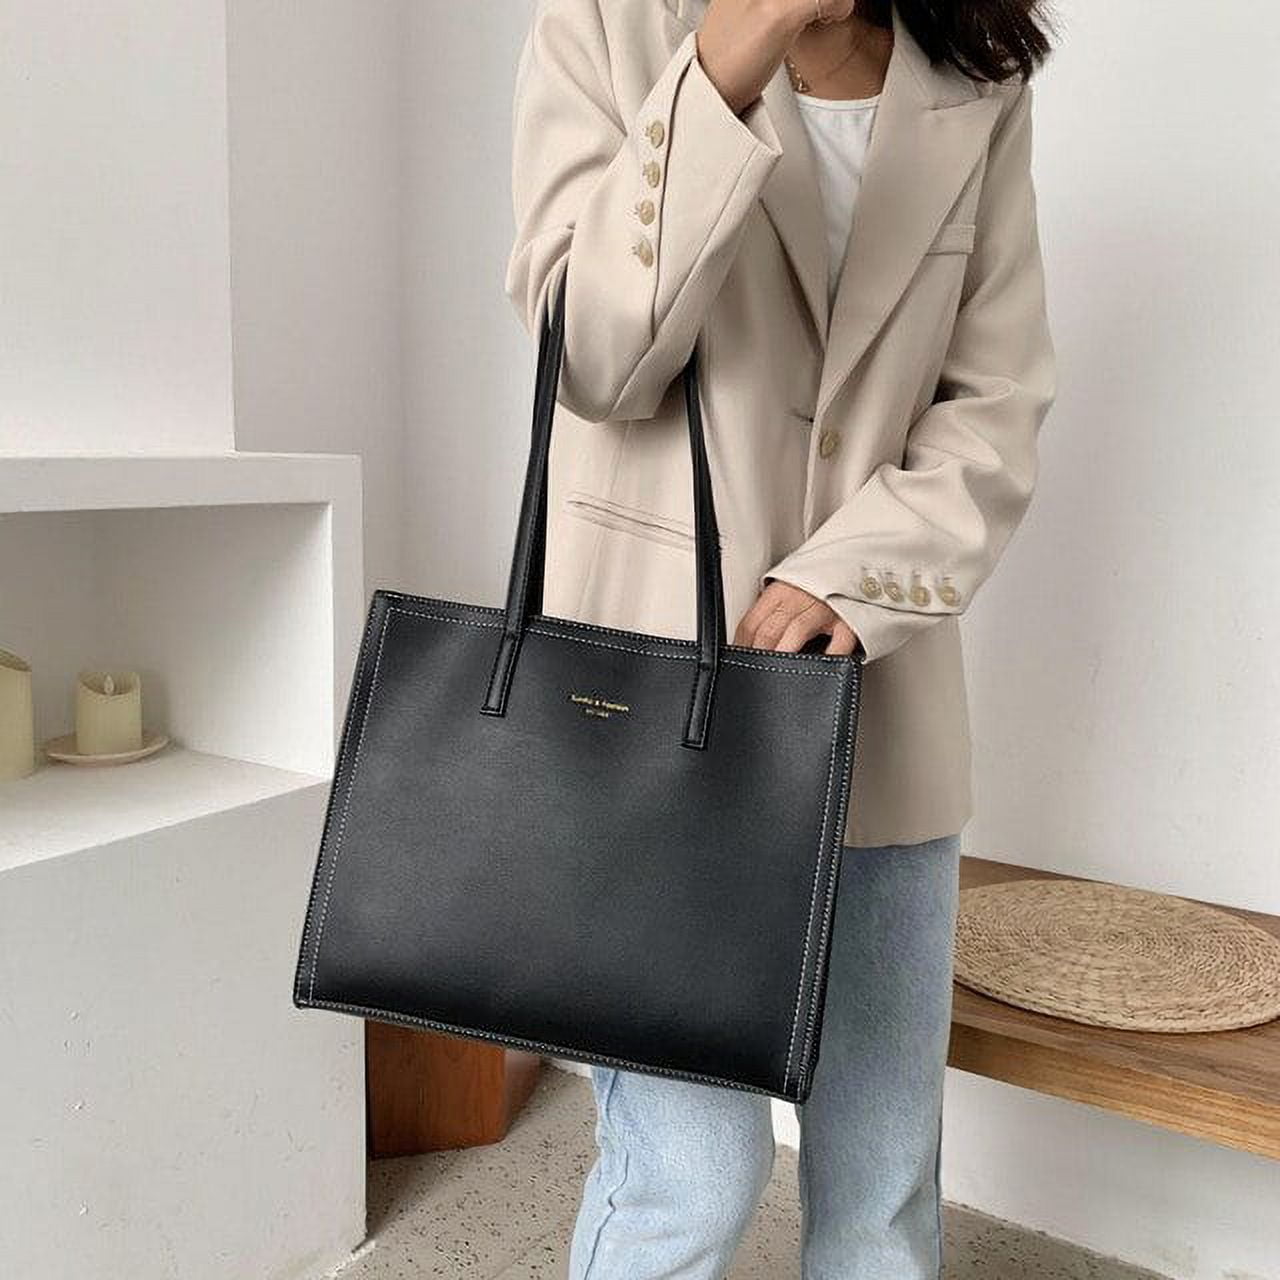 CoCopeaunts Womens Solid Color Tote Bags High Quality Soft Leather Shoulder  Bag Casual Designer Big Handbag Female New Simple Shopping Bag